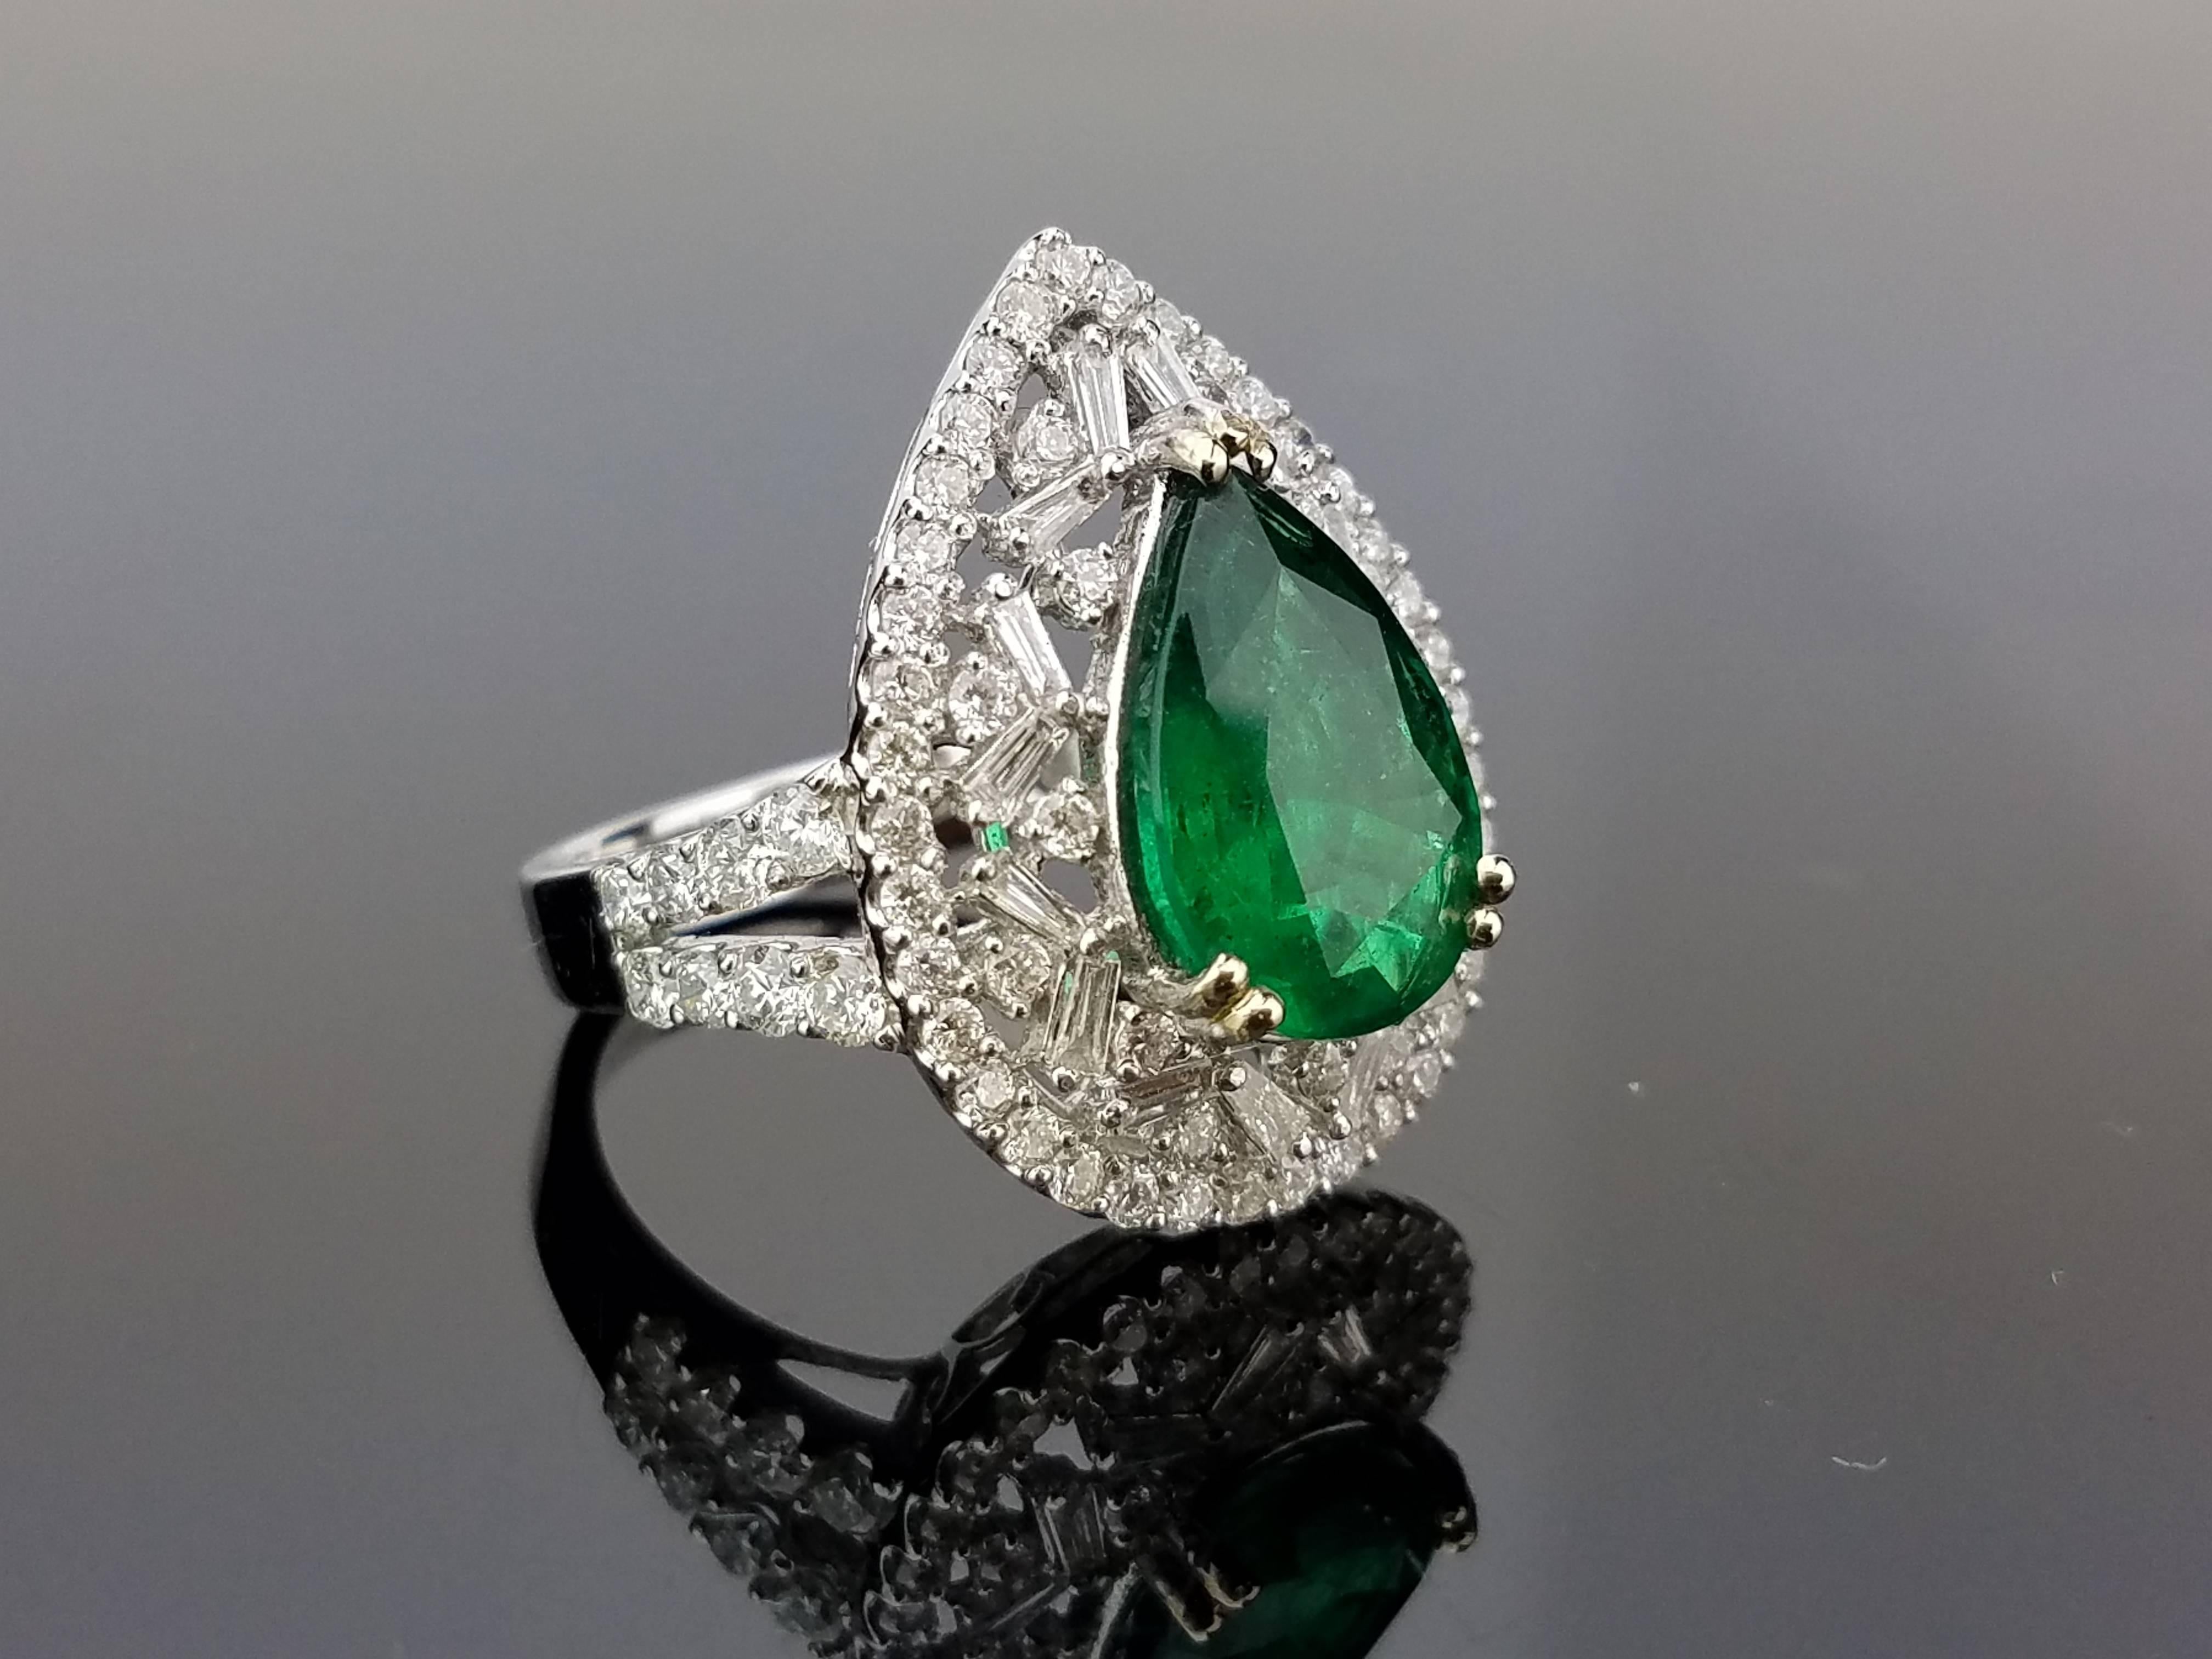 An elegant cocktail ring using a lustrous pear shape Emerald centre stone surrounded by baguette and brilliant cut white Diamonds, all set in 18K white gold. 

Stone Details: 
Stone: Emerald
Carat Weight: 3.52 Carats

Diamond Details: 
Total Carat